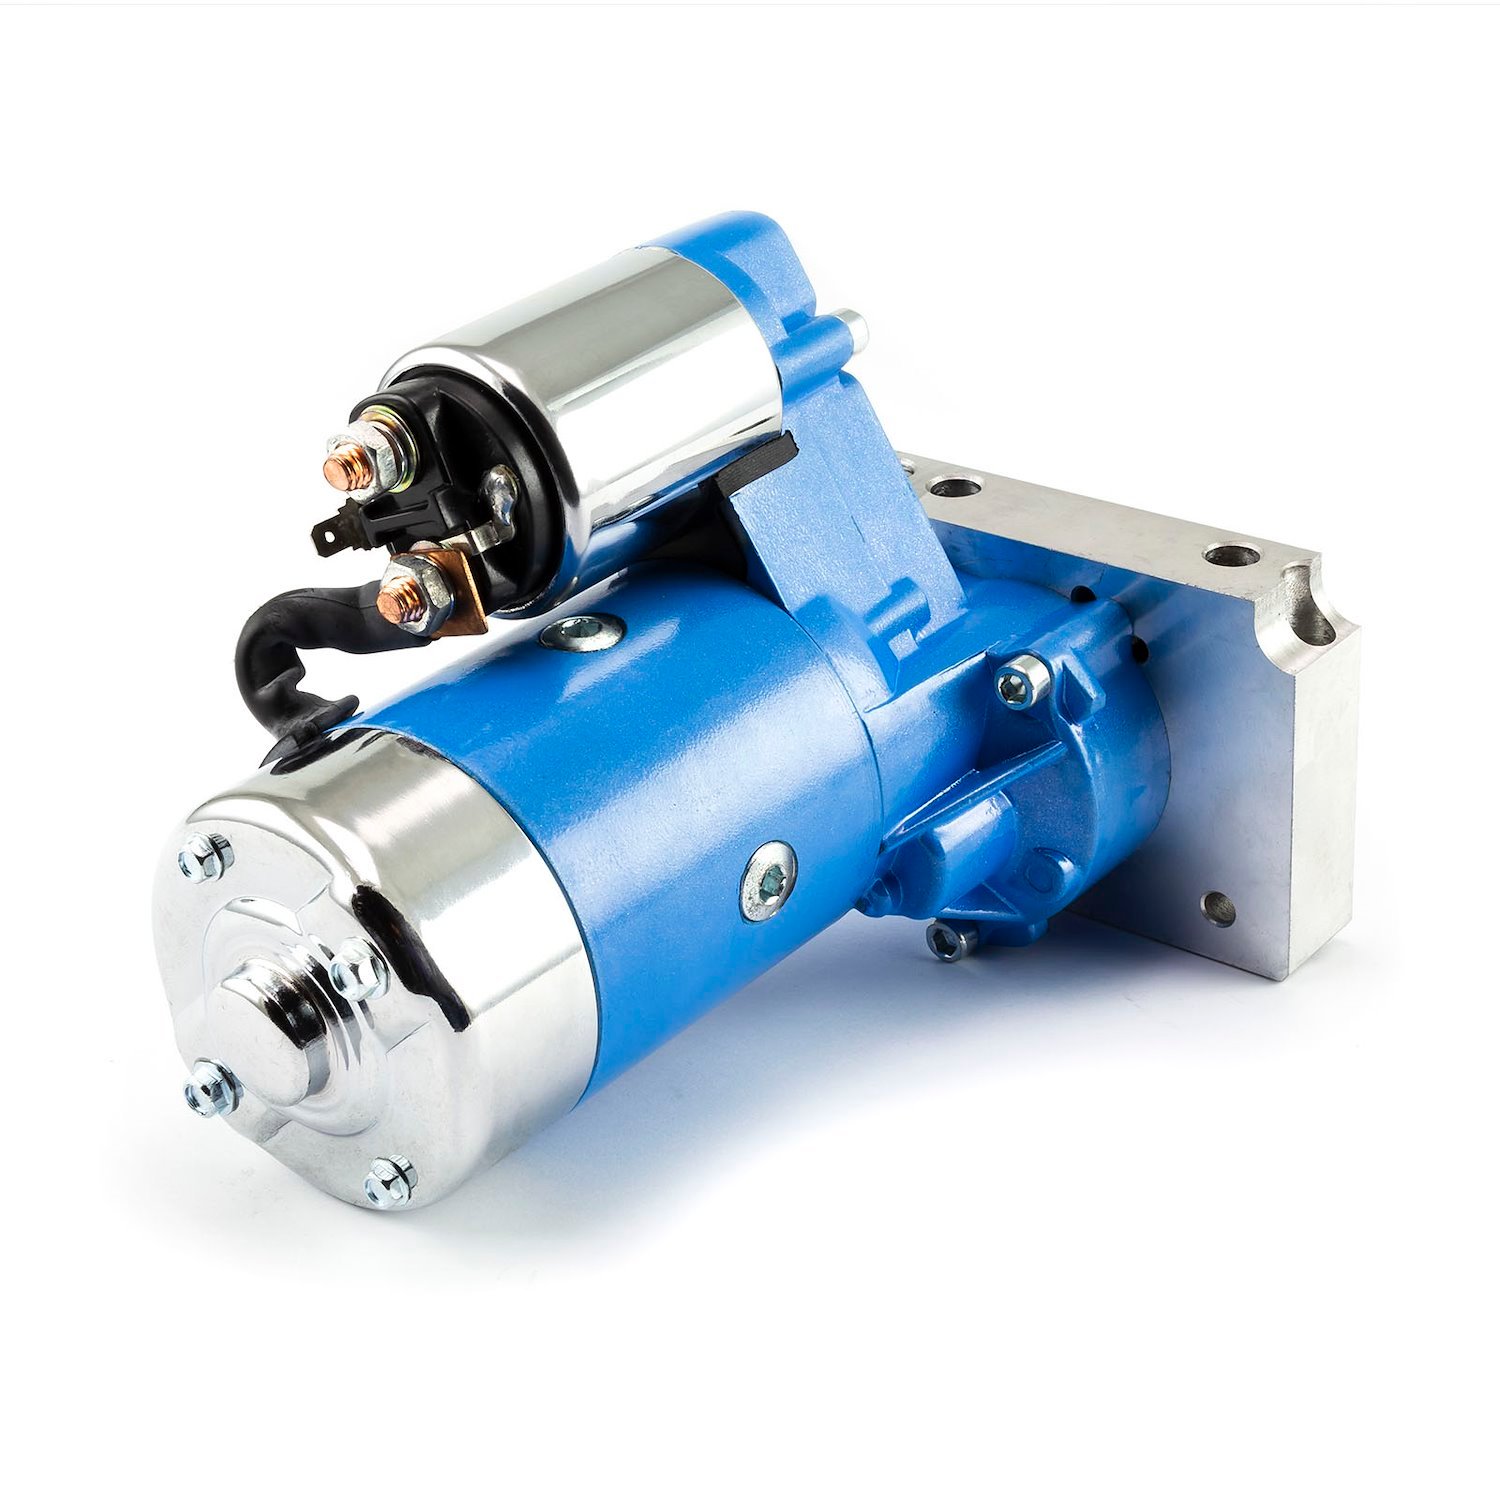 PCE393.1020.04 Mini-Torque Starter for Small Block Chevy 350, Big Block Chevy 454 [Blue Painted Finish]